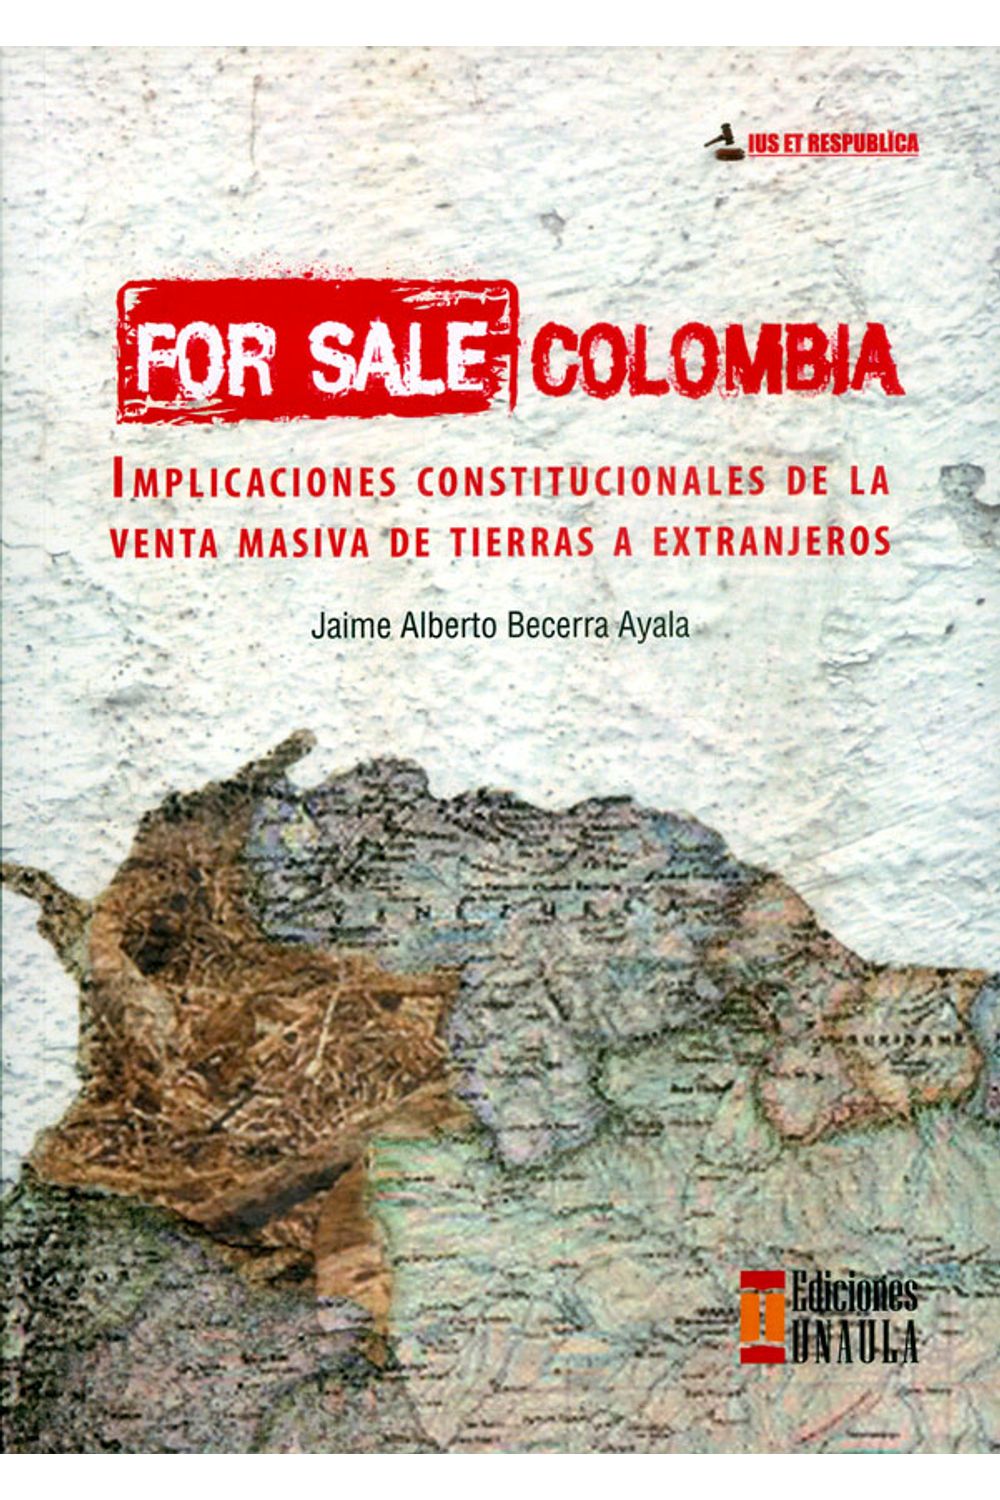 for-sale-colombia-9789588869865-uala